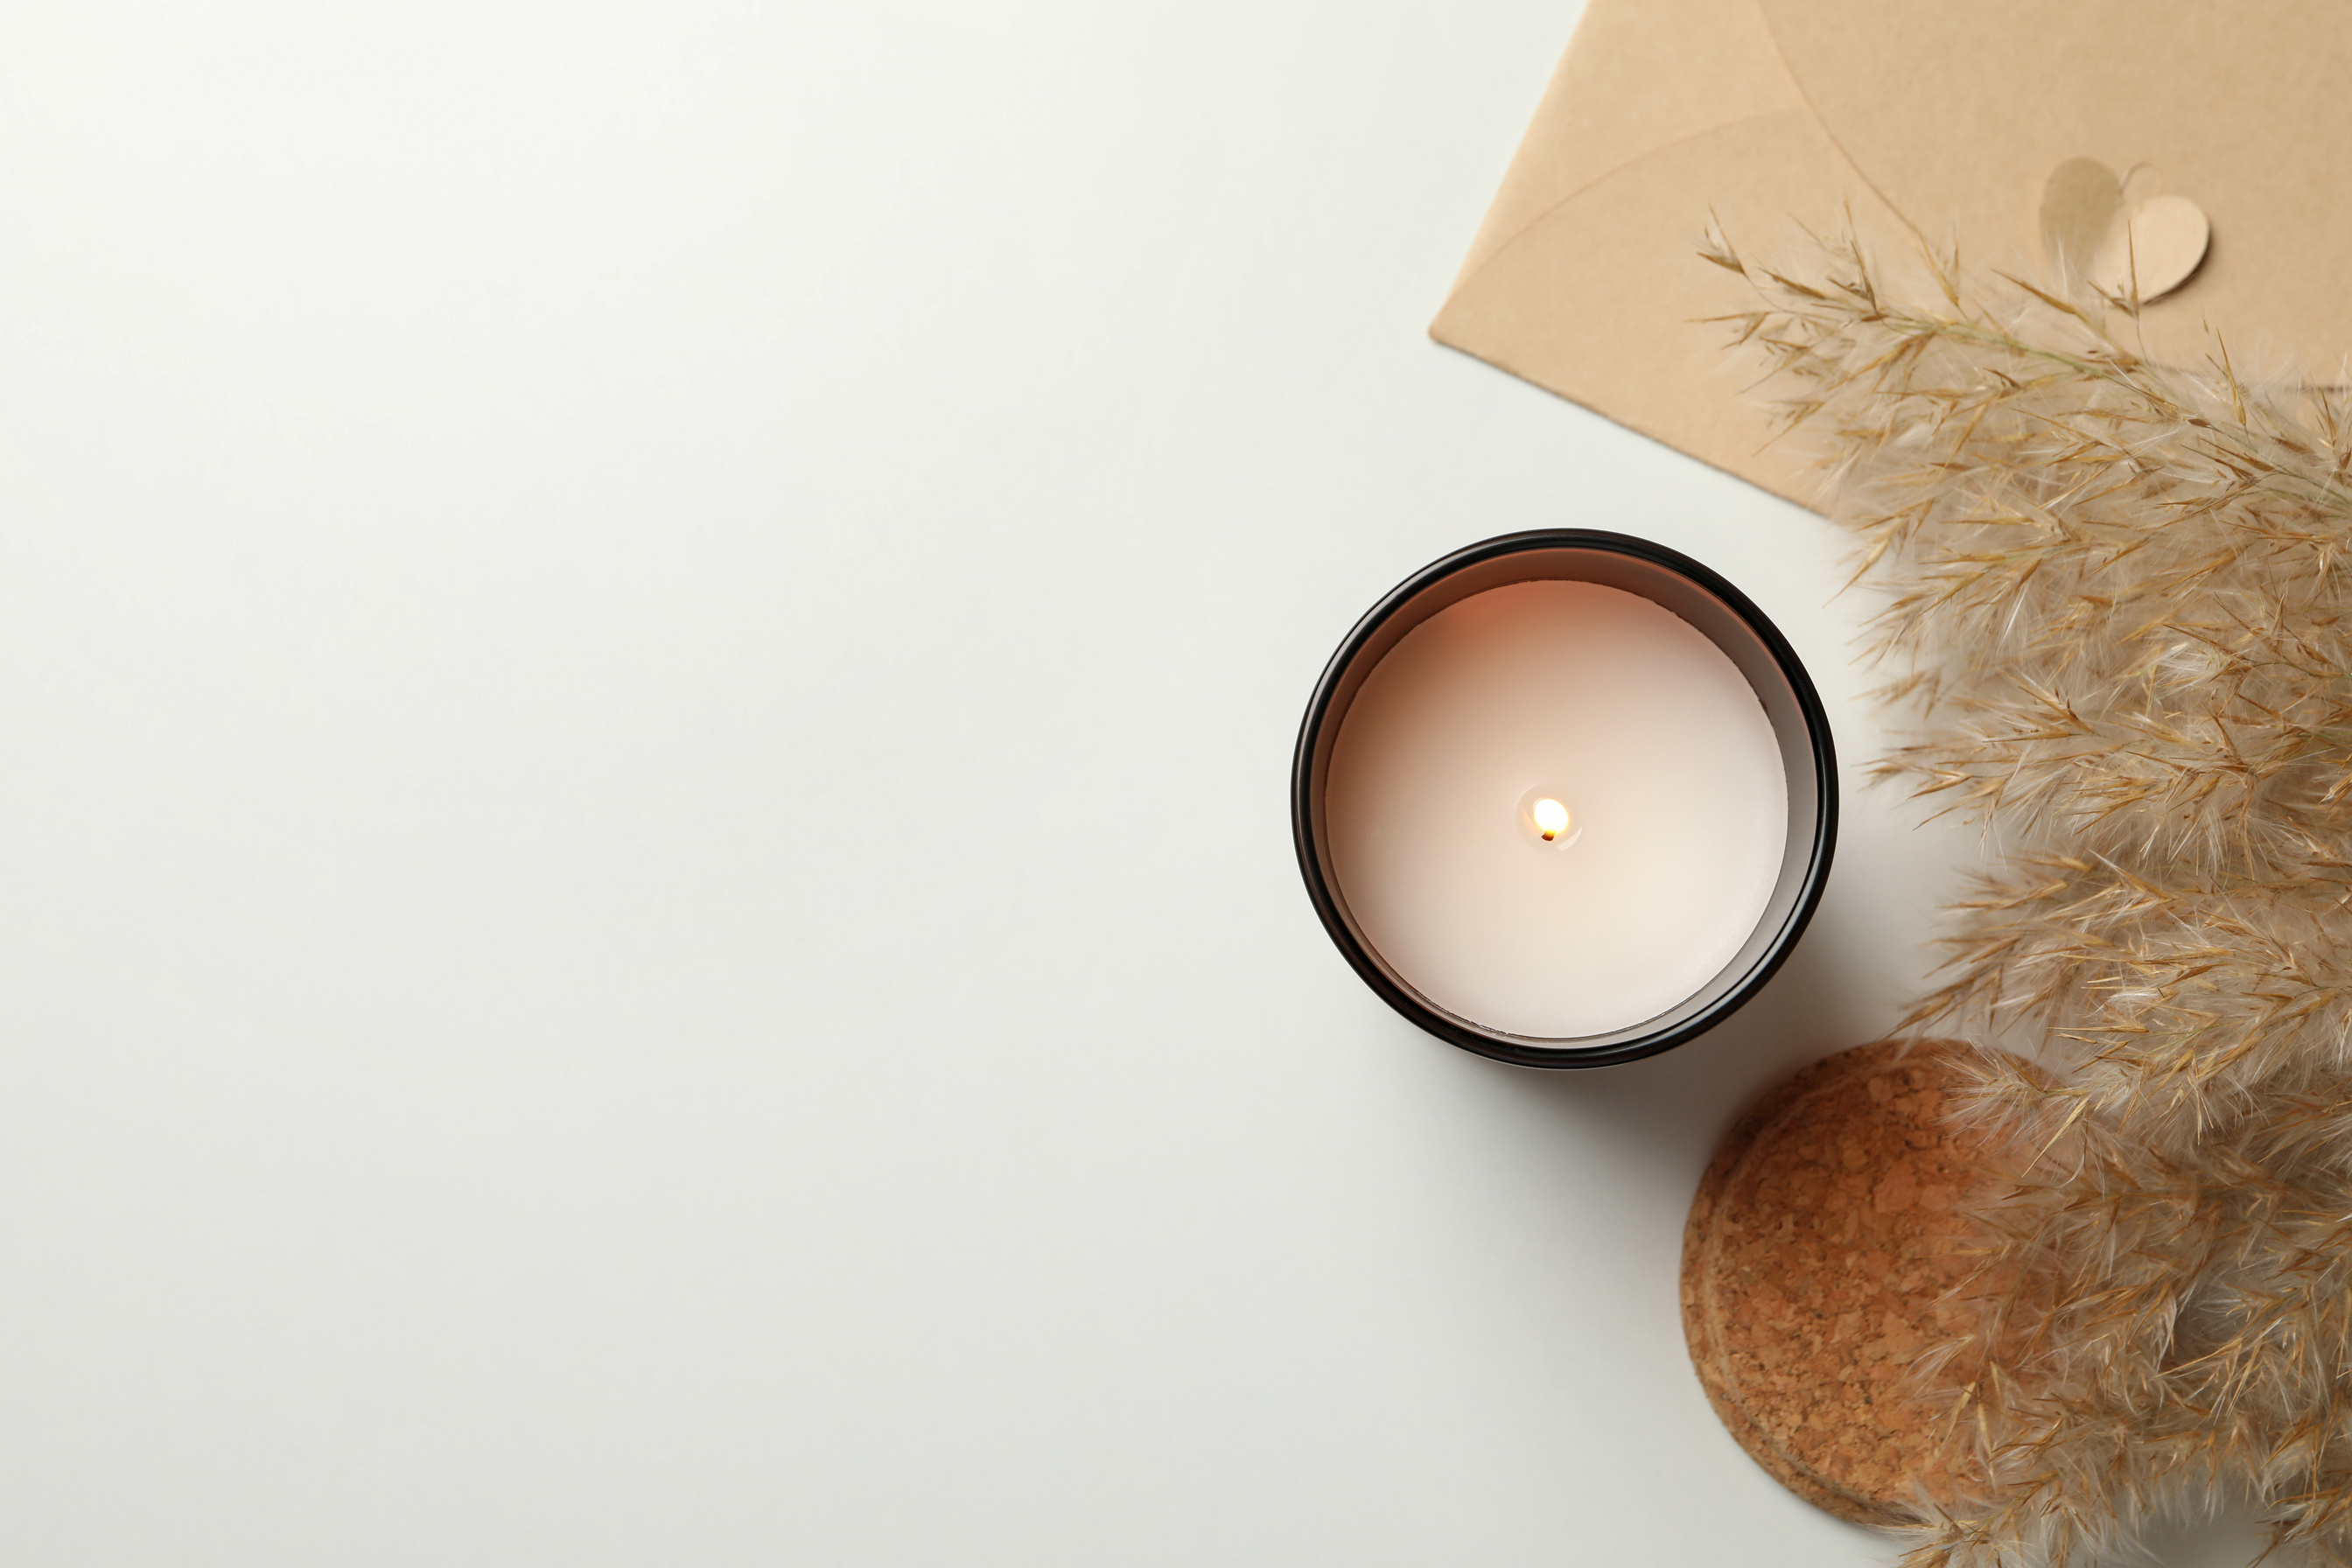 Scented Candle, Envelope and Reed Grass on White Background